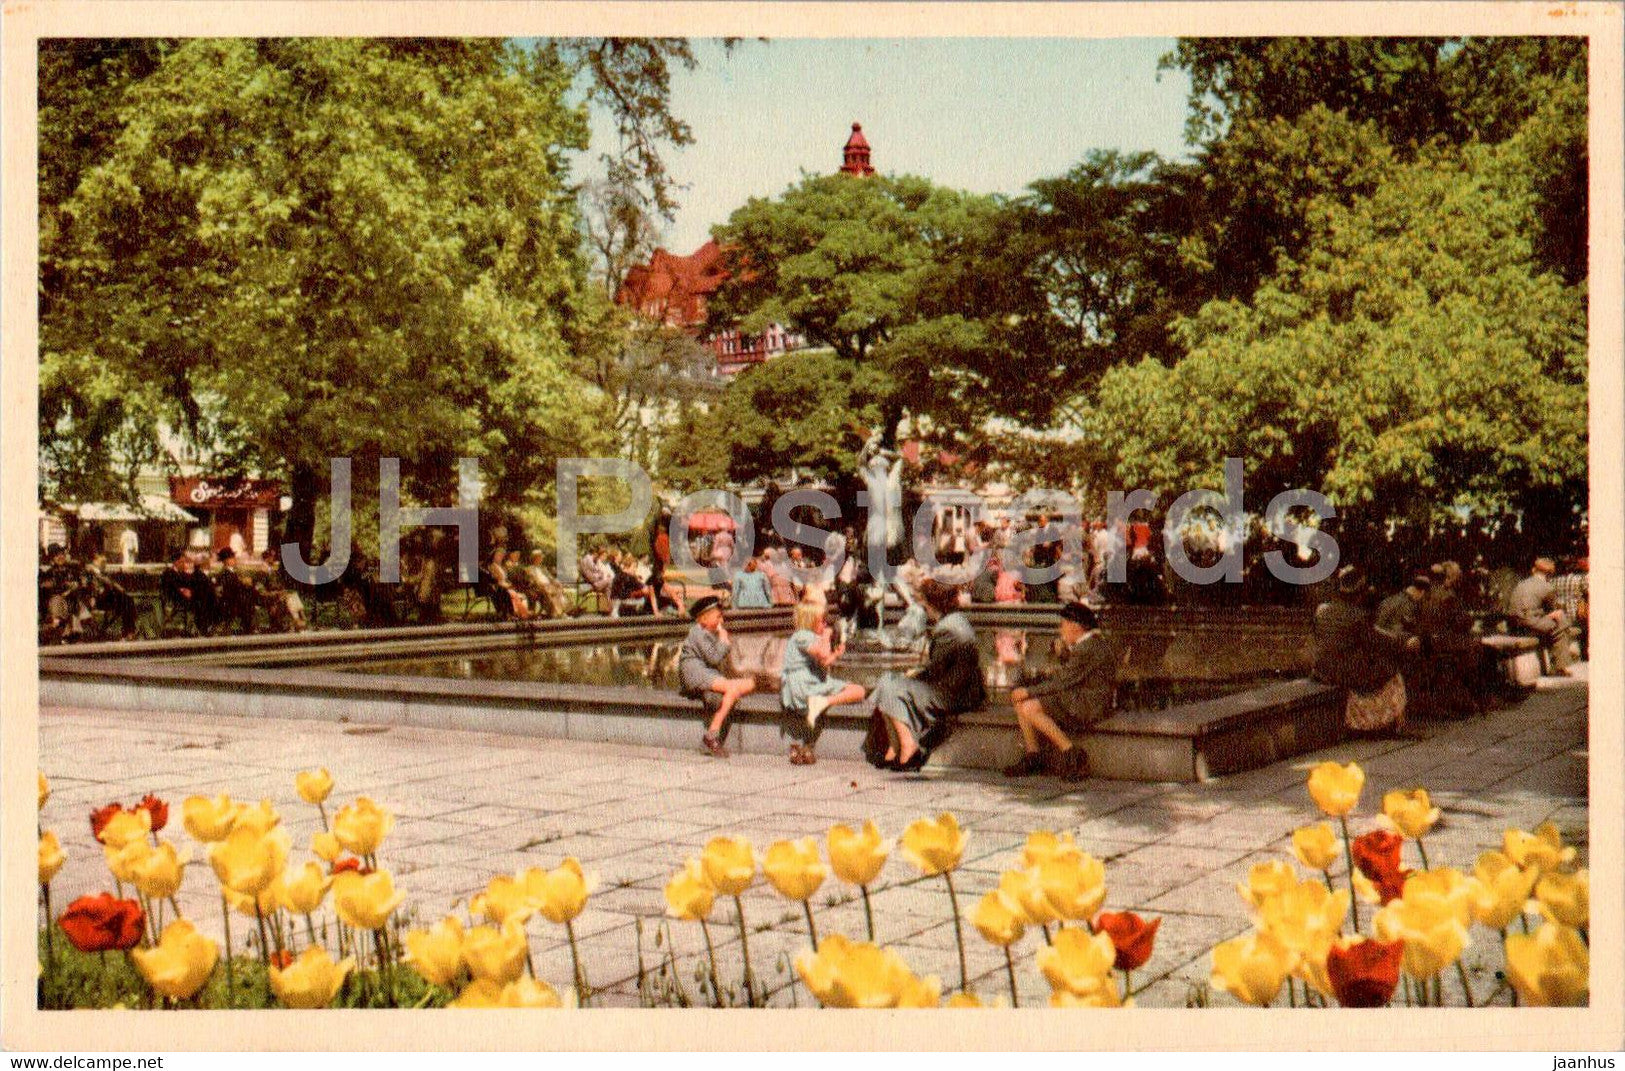 Malmo - Gustav Adolfs torg med fontanen Oresund - square with the fountain Sound - 37 - old postcard - Sweden - used - JH Postcards